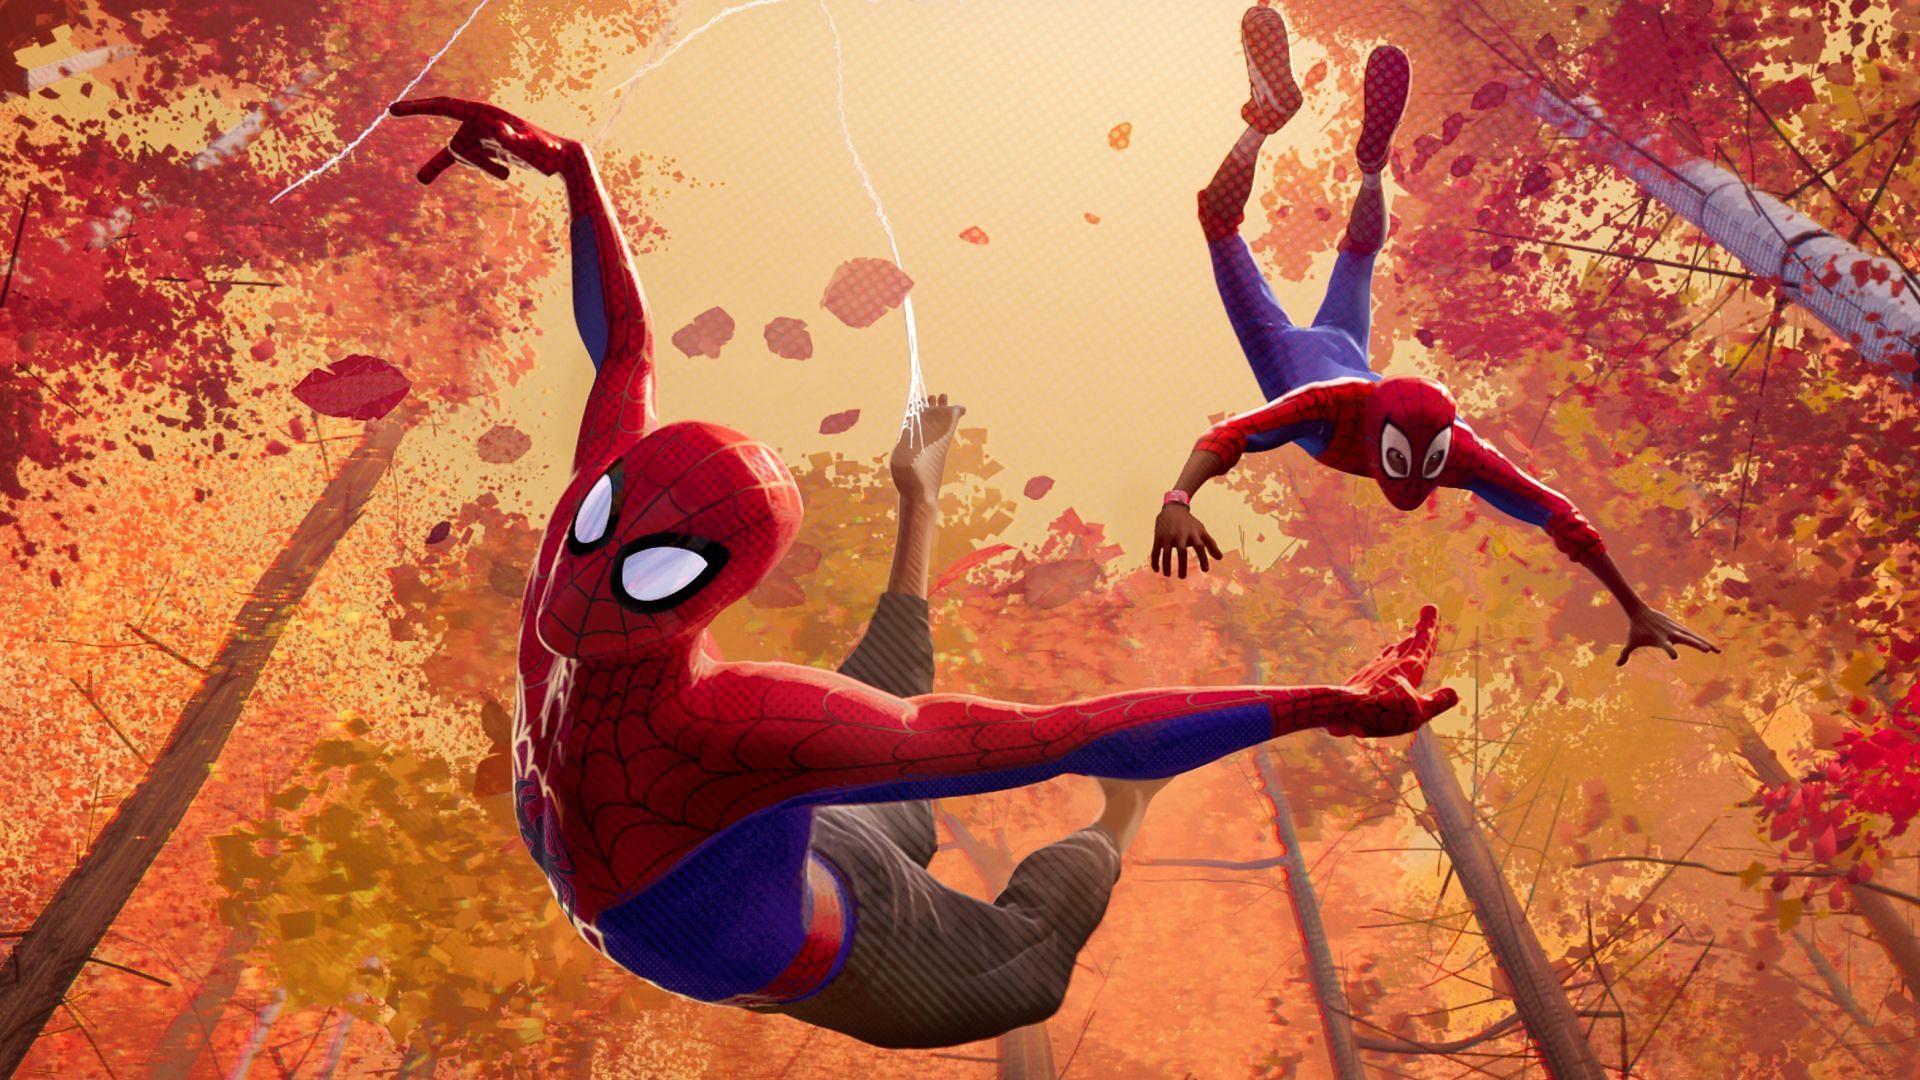 Peter B. Parker and Miles Morales in Spider-Man: Into the Spider-Verse (Image via Sony)